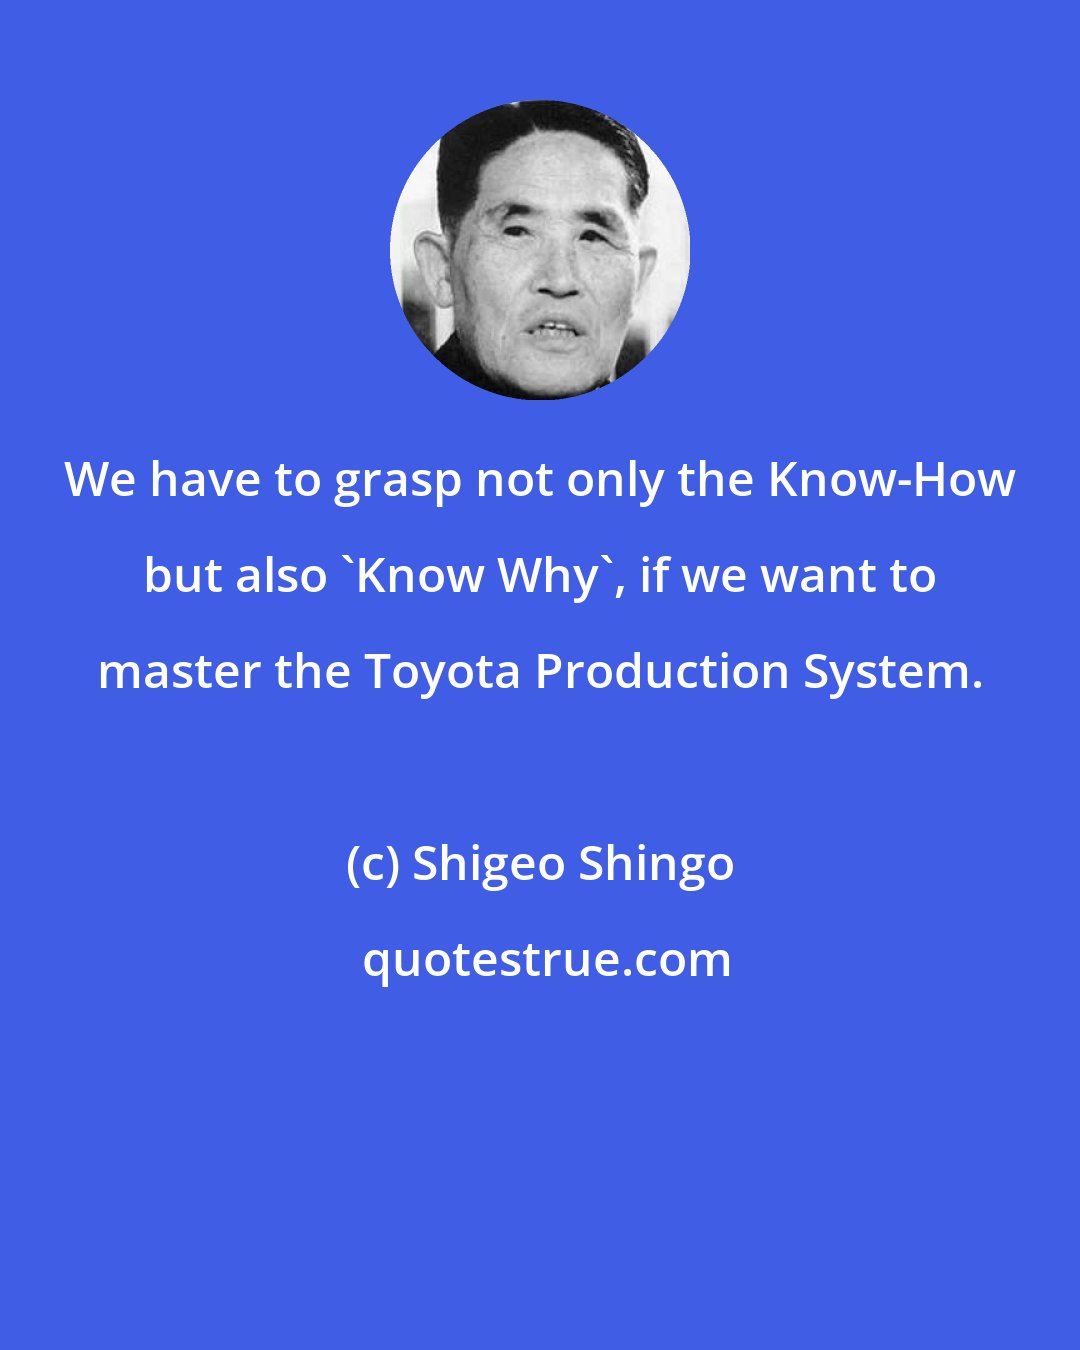 Shigeo Shingo: We have to grasp not only the Know-How but also 'Know Why', if we want to master the Toyota Production System.